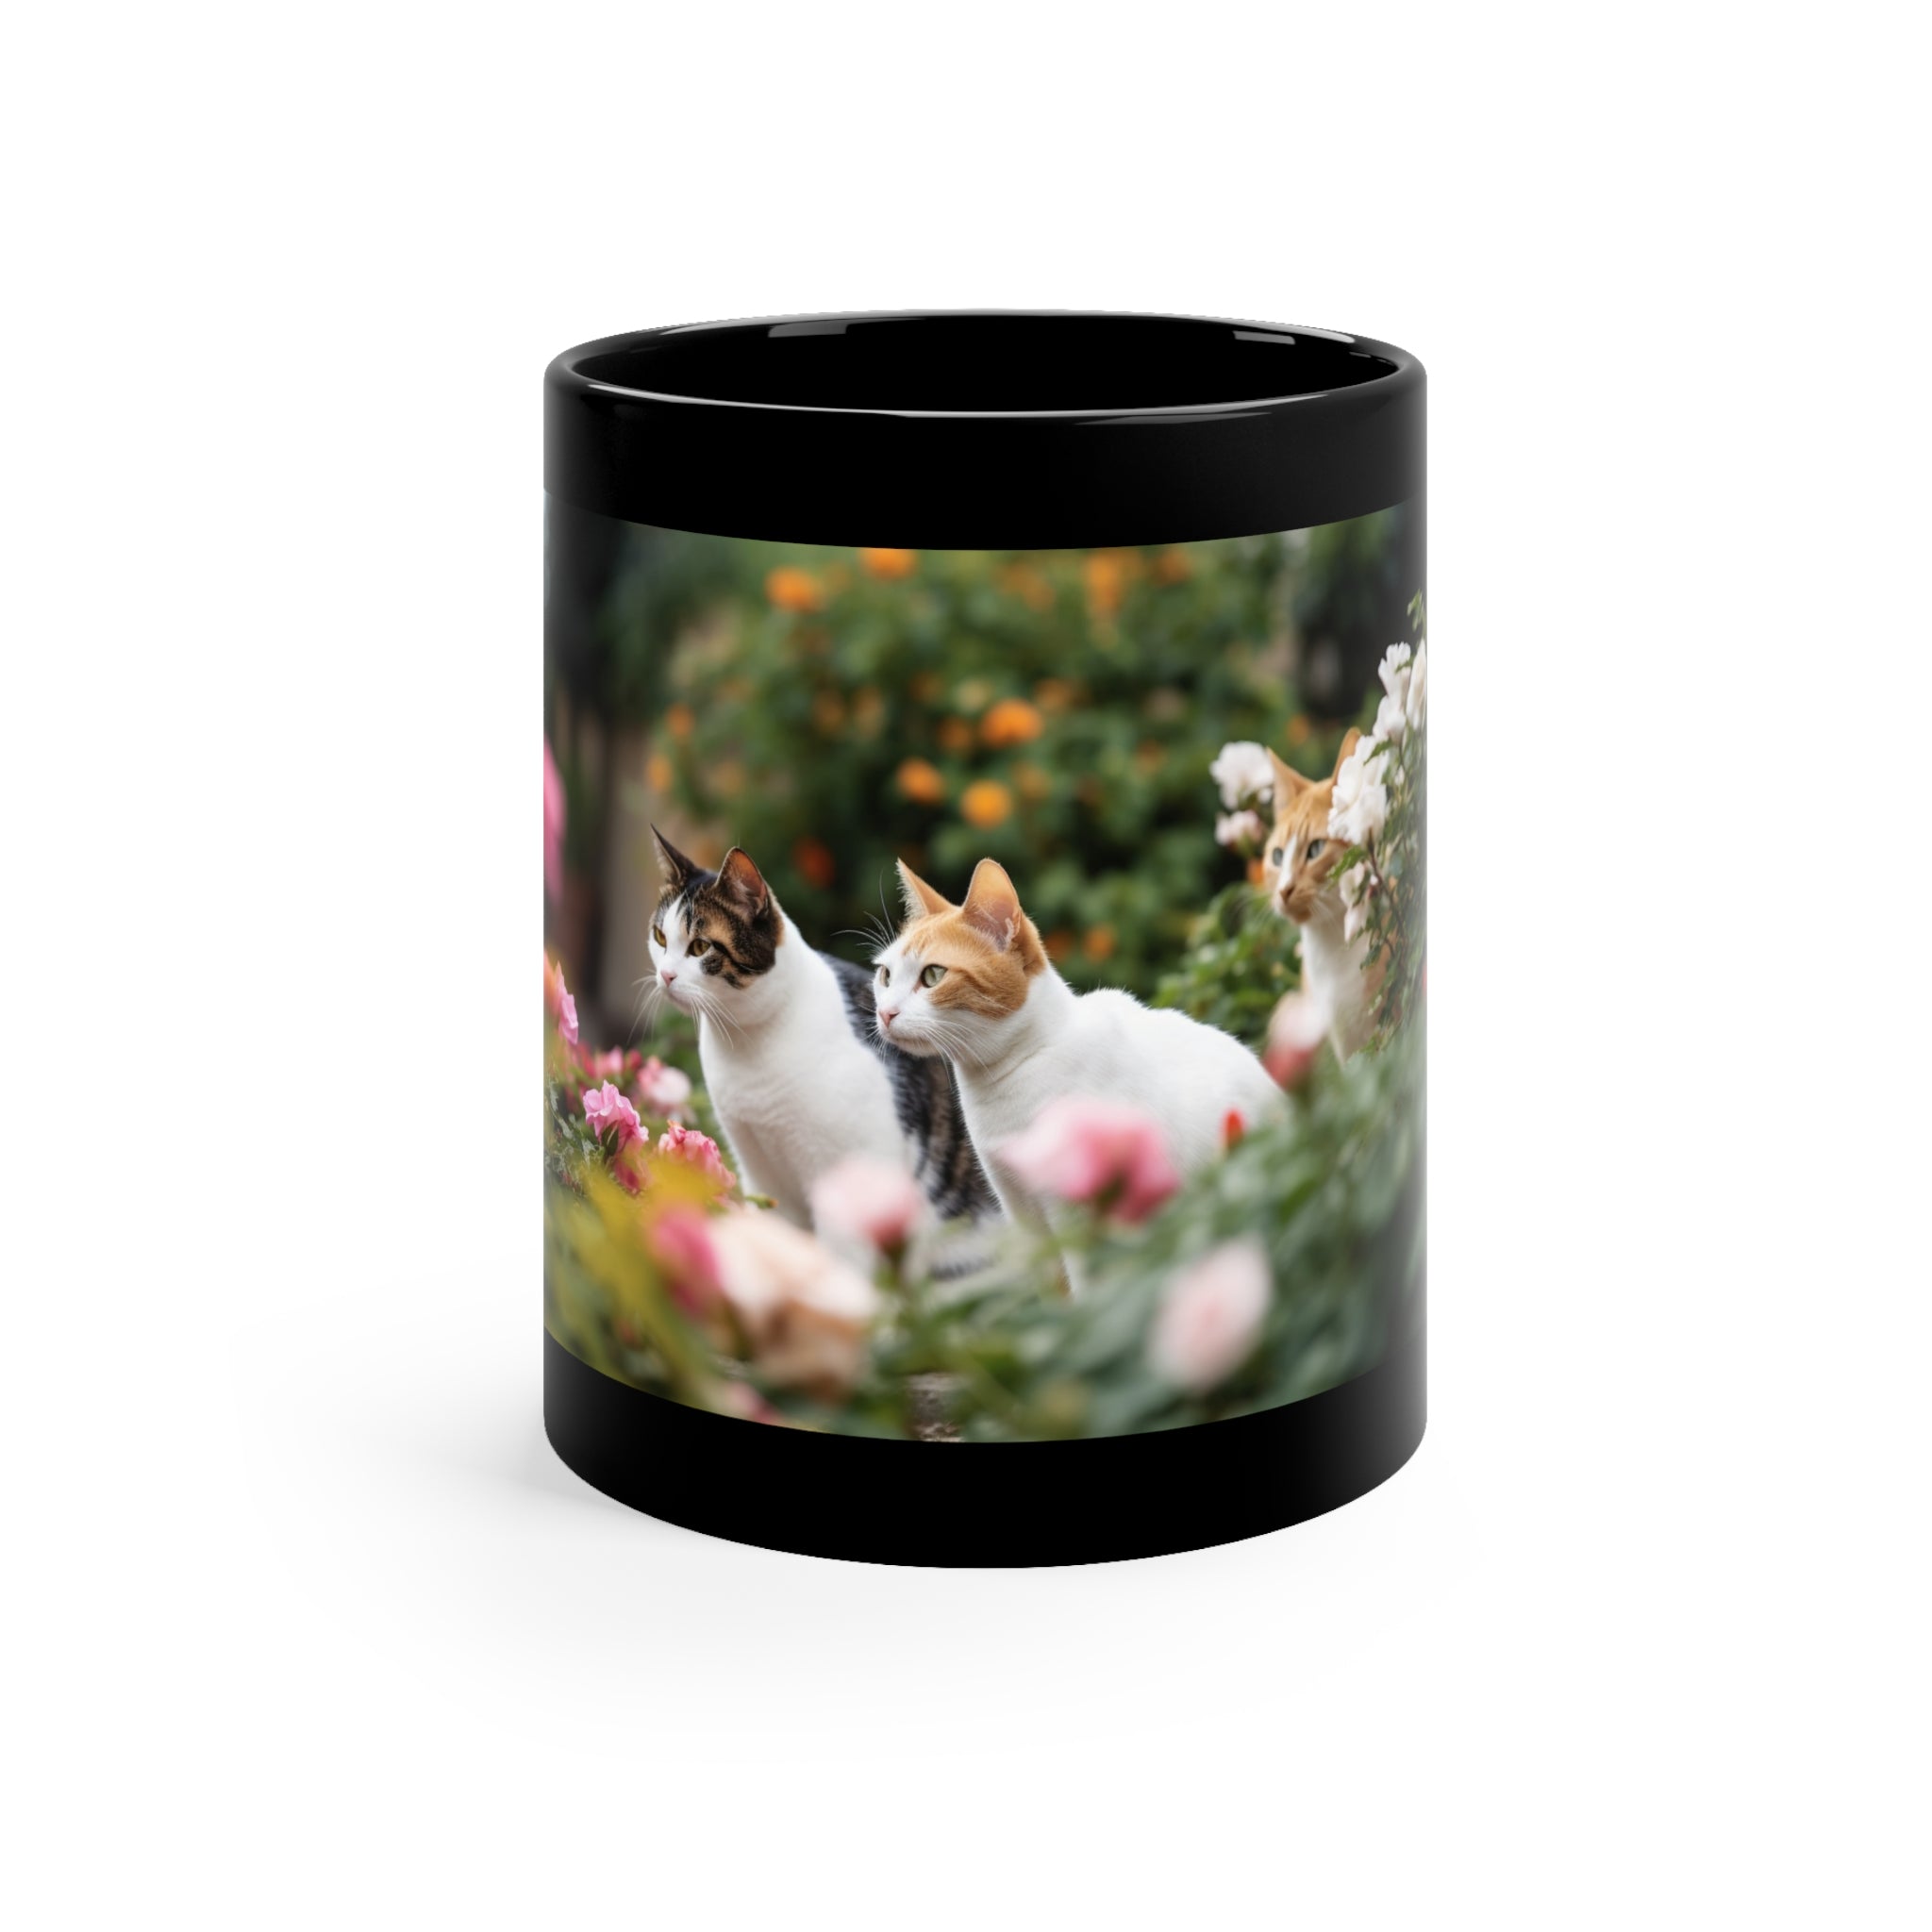 Beautiful Garden Party Animals, and Floral accent, Coffee Mug Gift Video for "Cawfee" drinkers and Starbucks Lovers